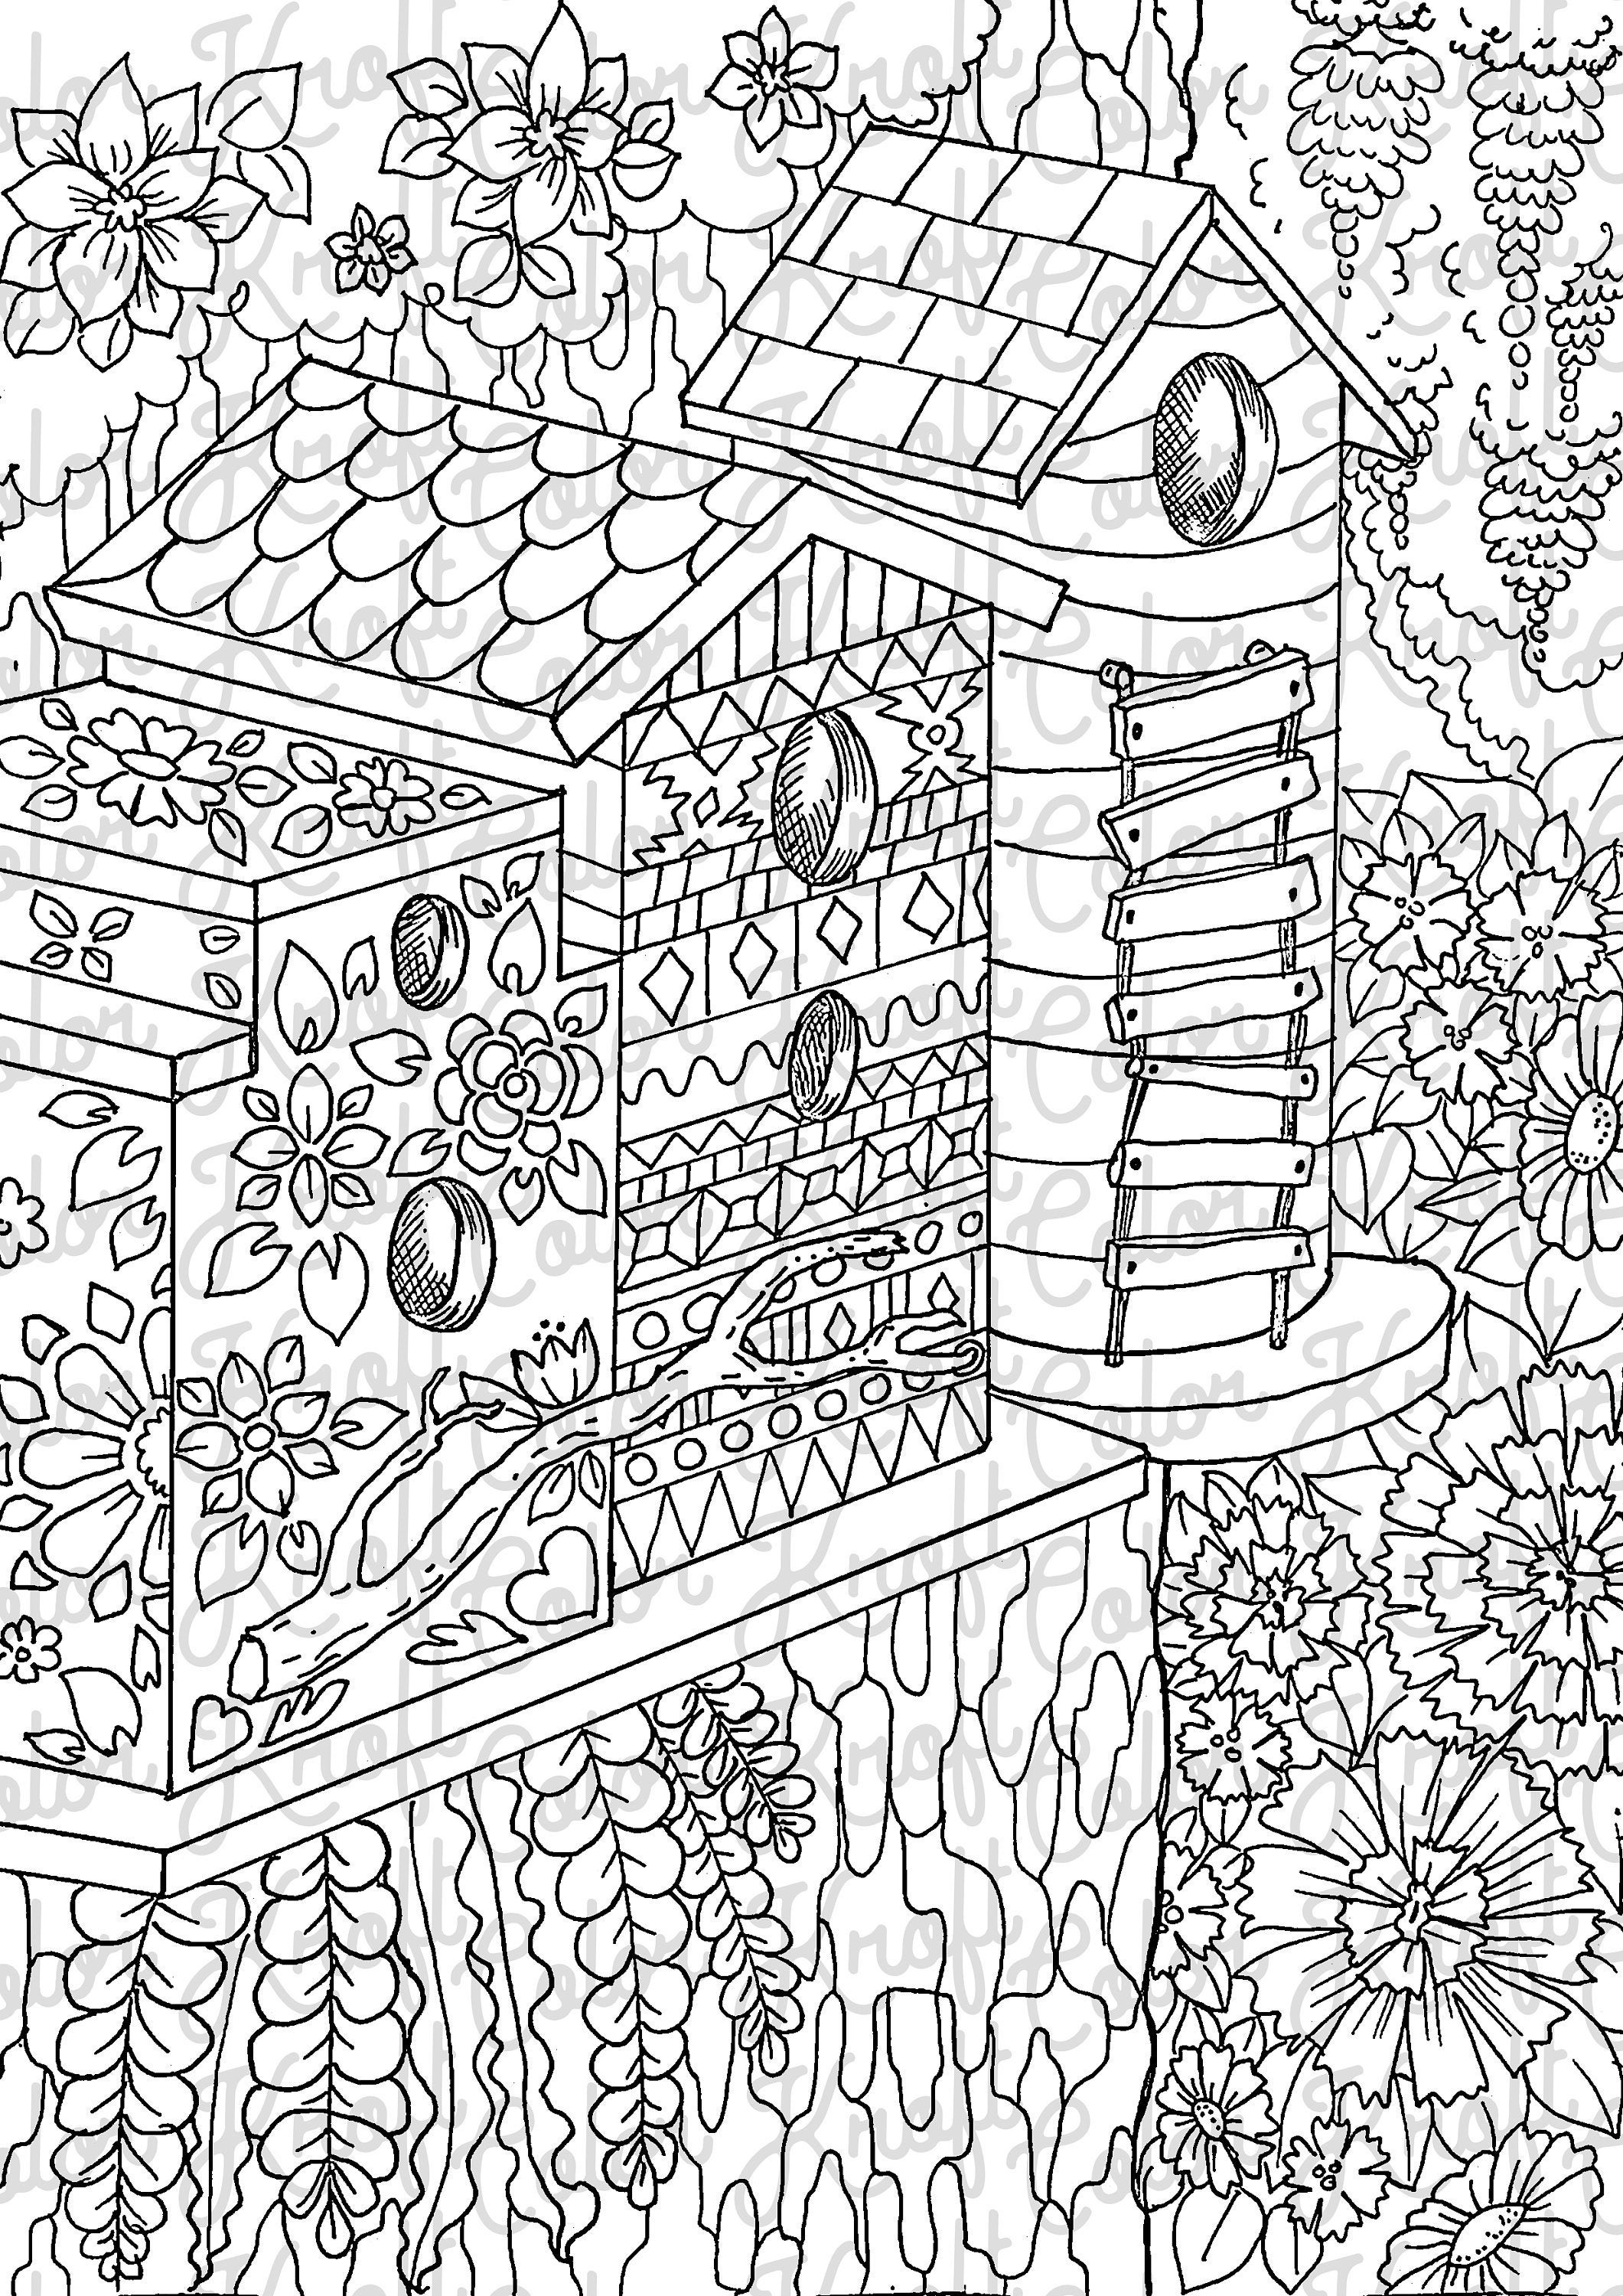 Download Bird Houses in the Country // Coloring Page Printable ...